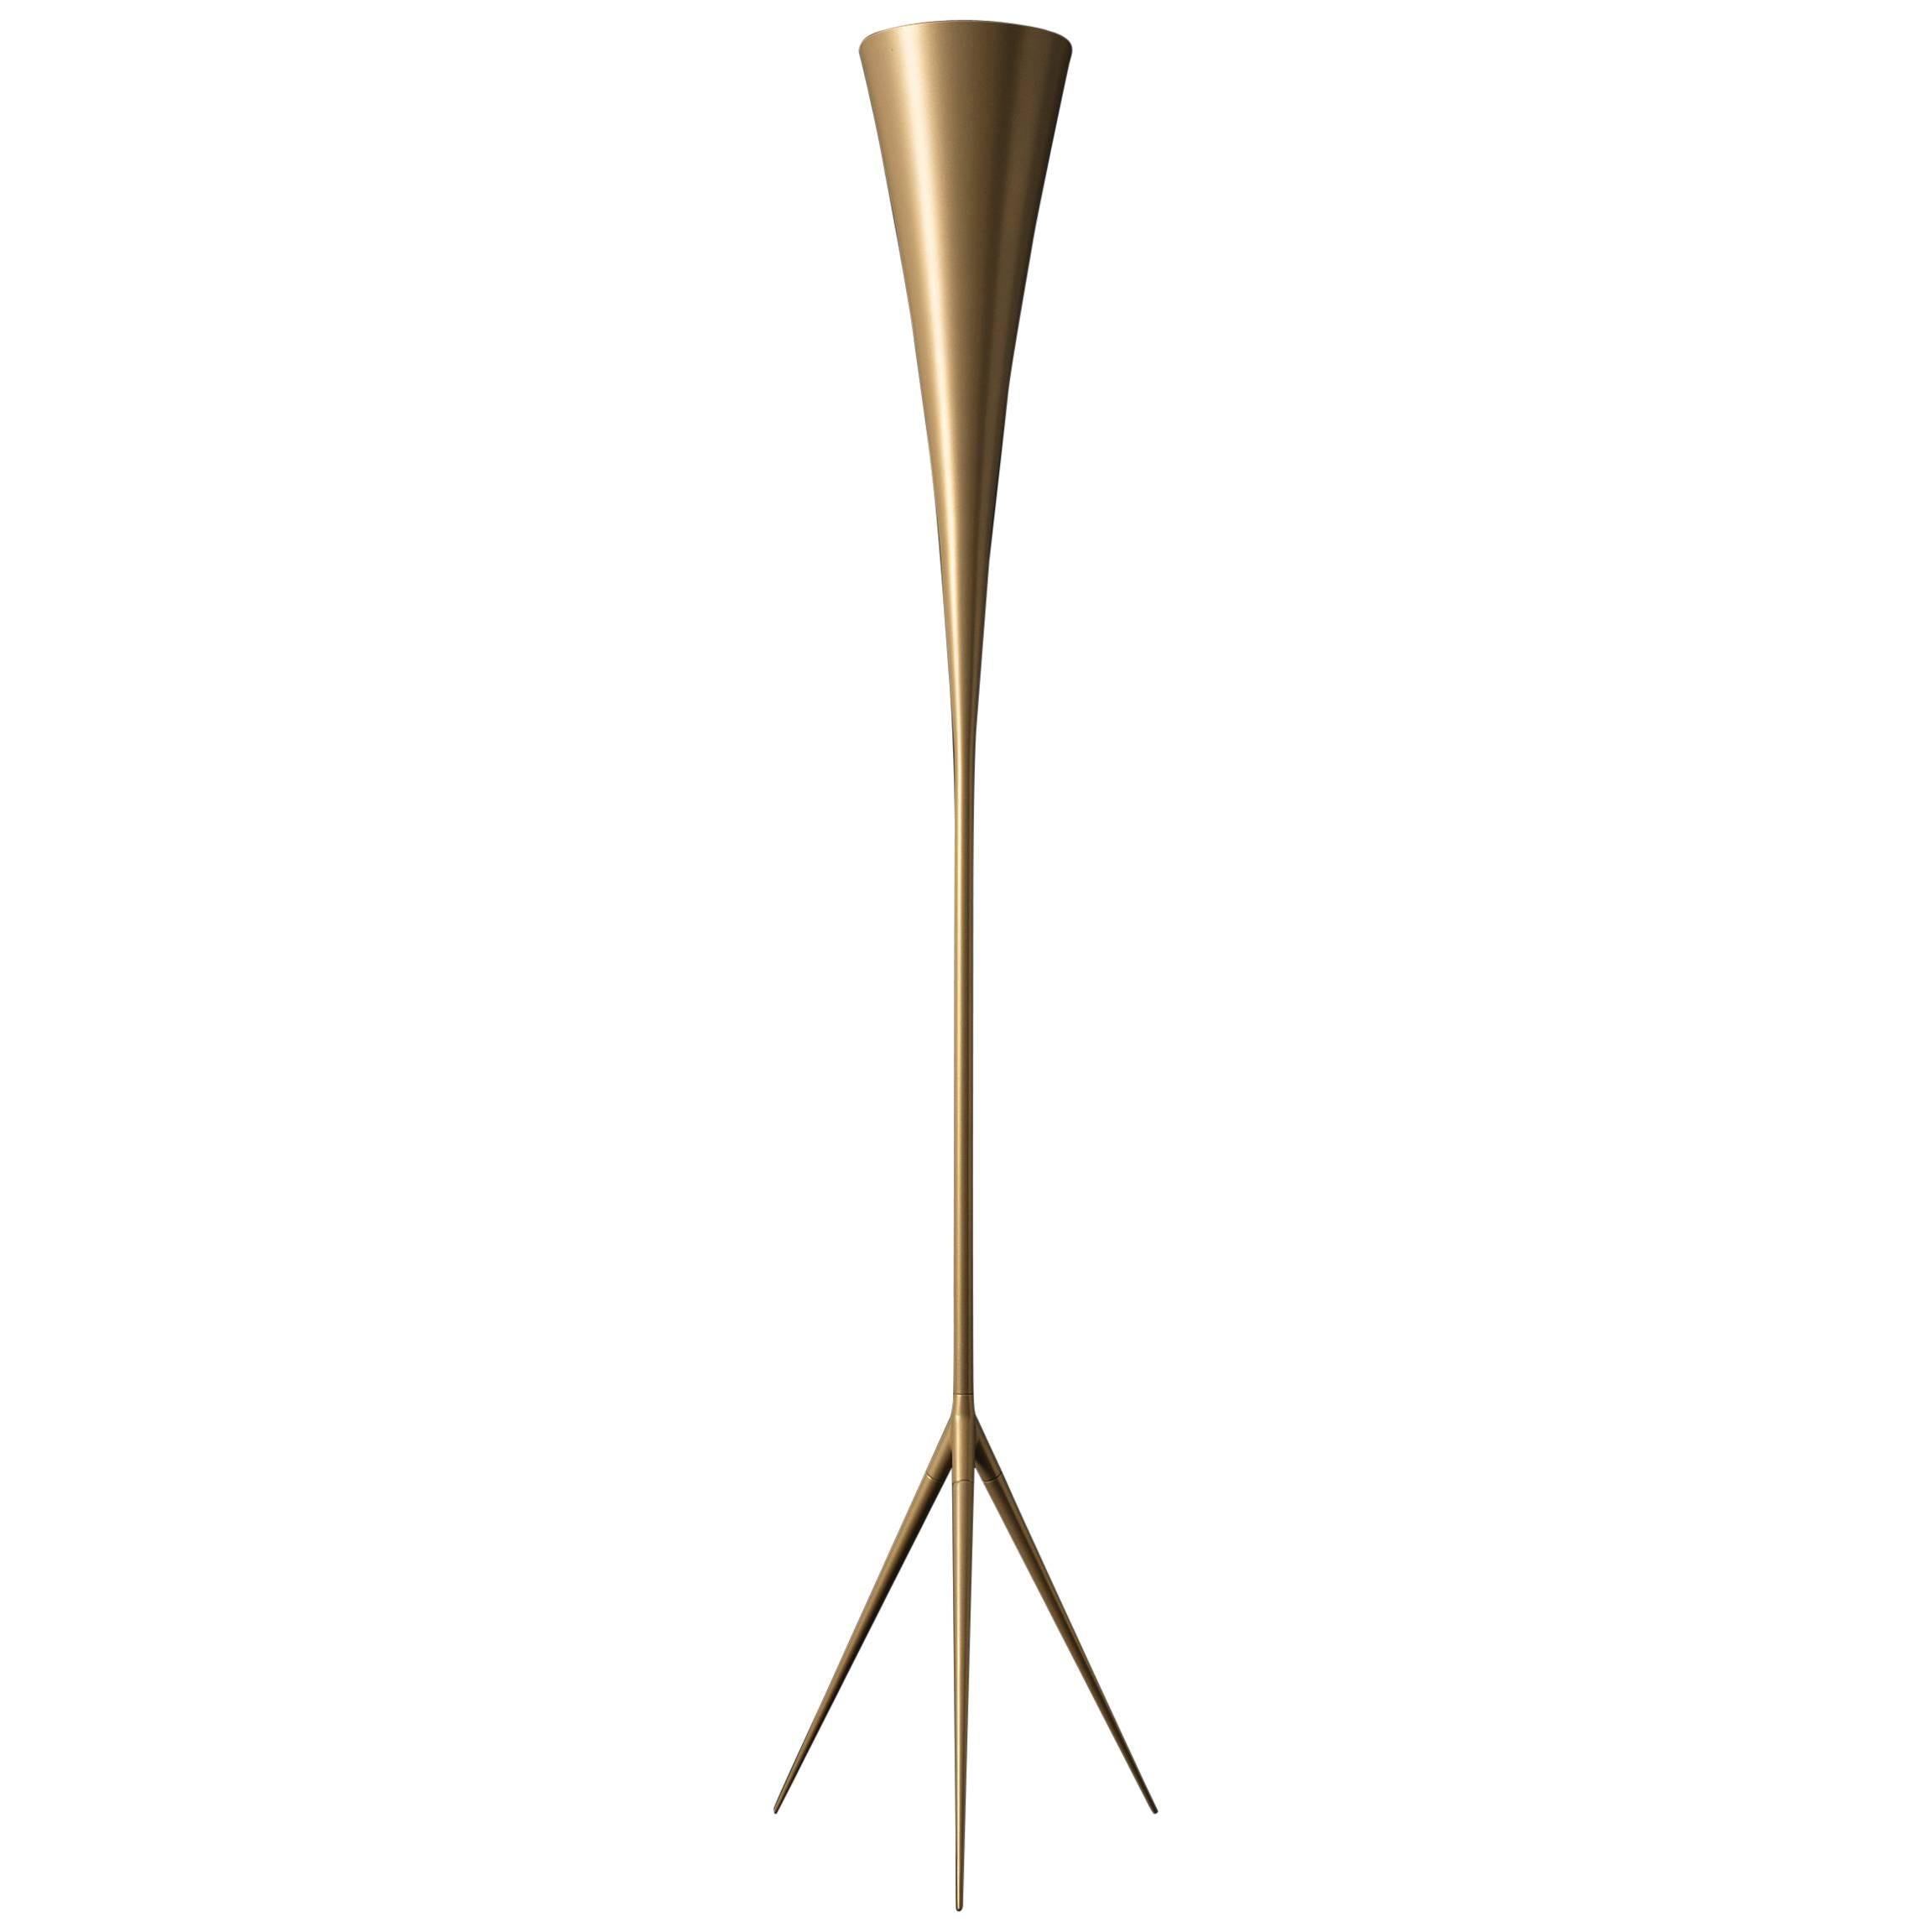 De-Lux B8  by Gio Ponti, never before produced piece For Sale